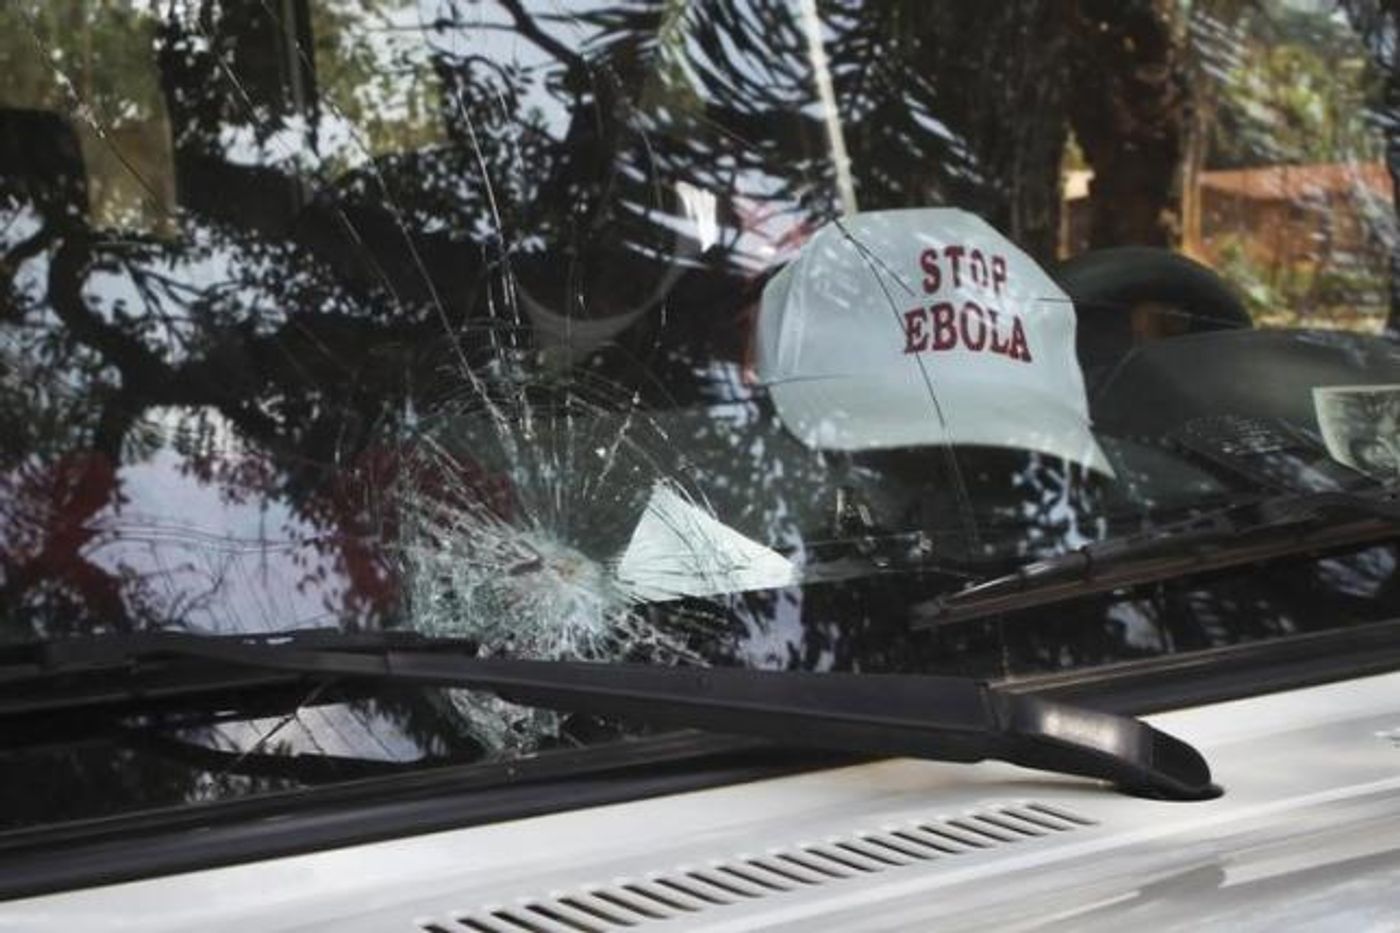 The broken windshield of an Ebola emergency team vehicle is seen after it had been pelted with stones in Lola February 9, 2015.